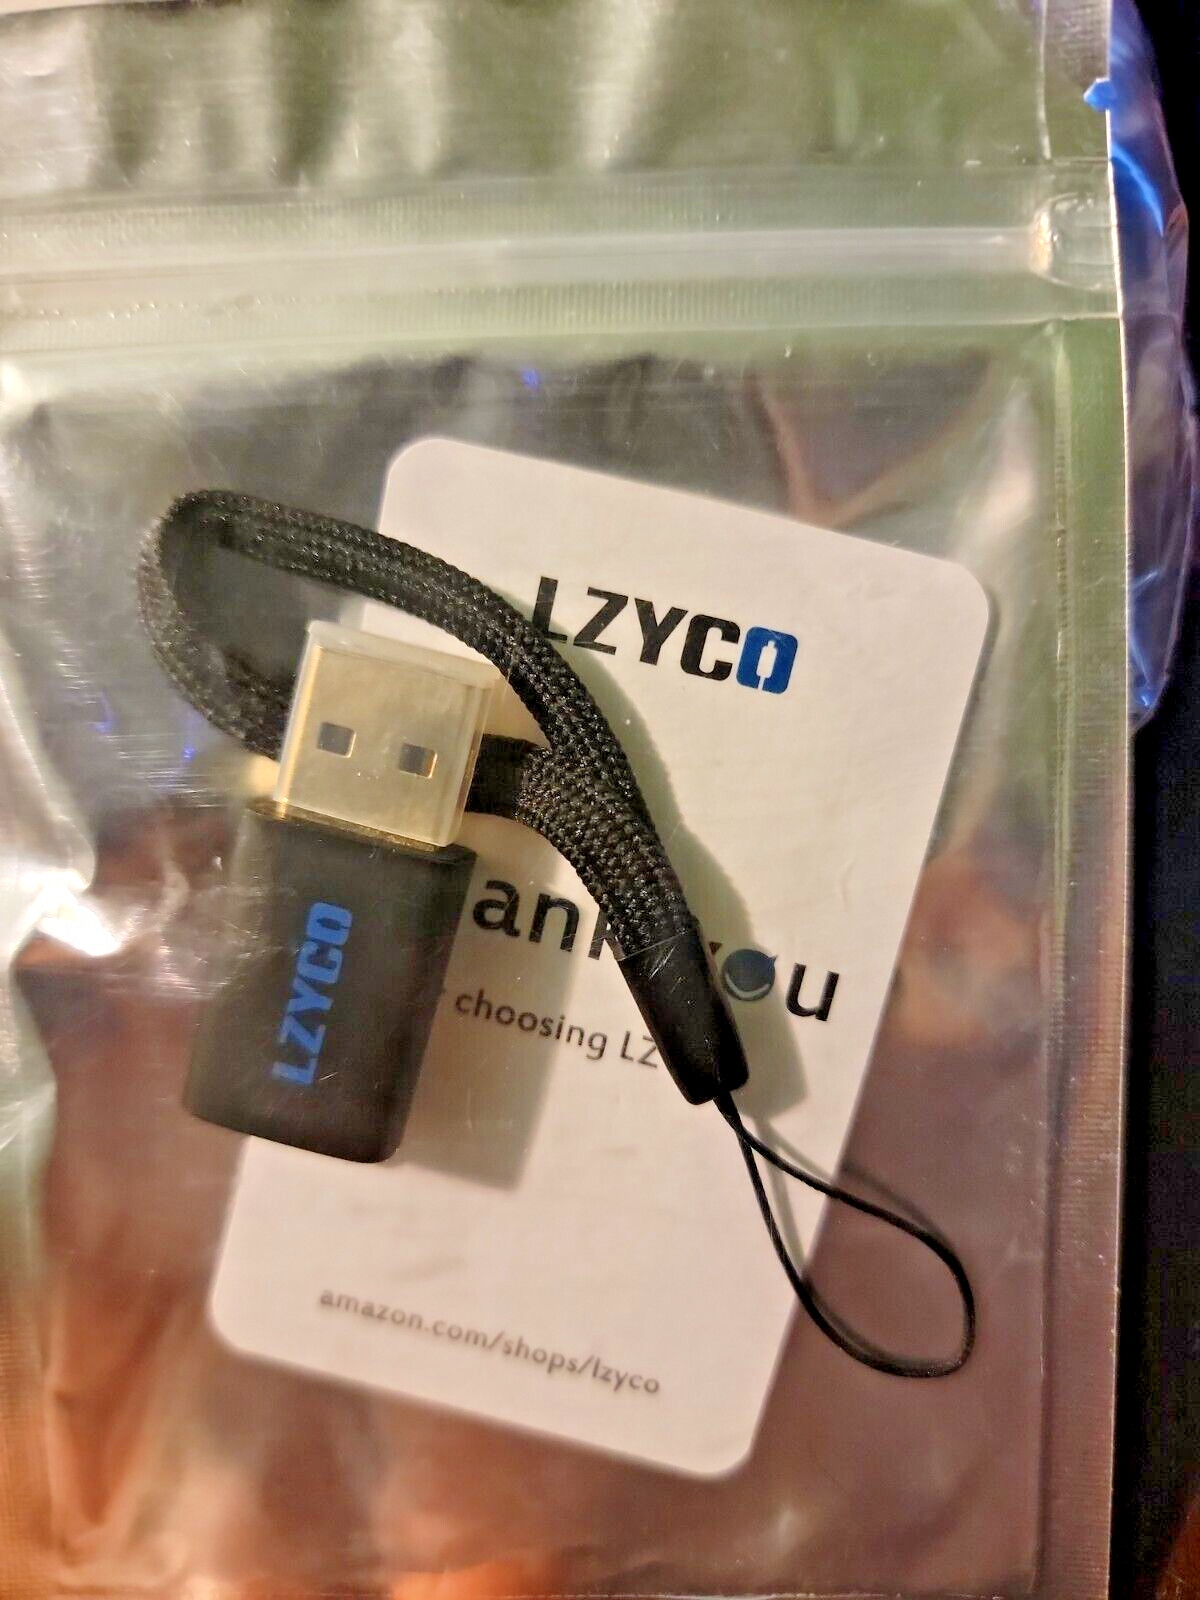 External USB to 3.5mm jack audio adapter